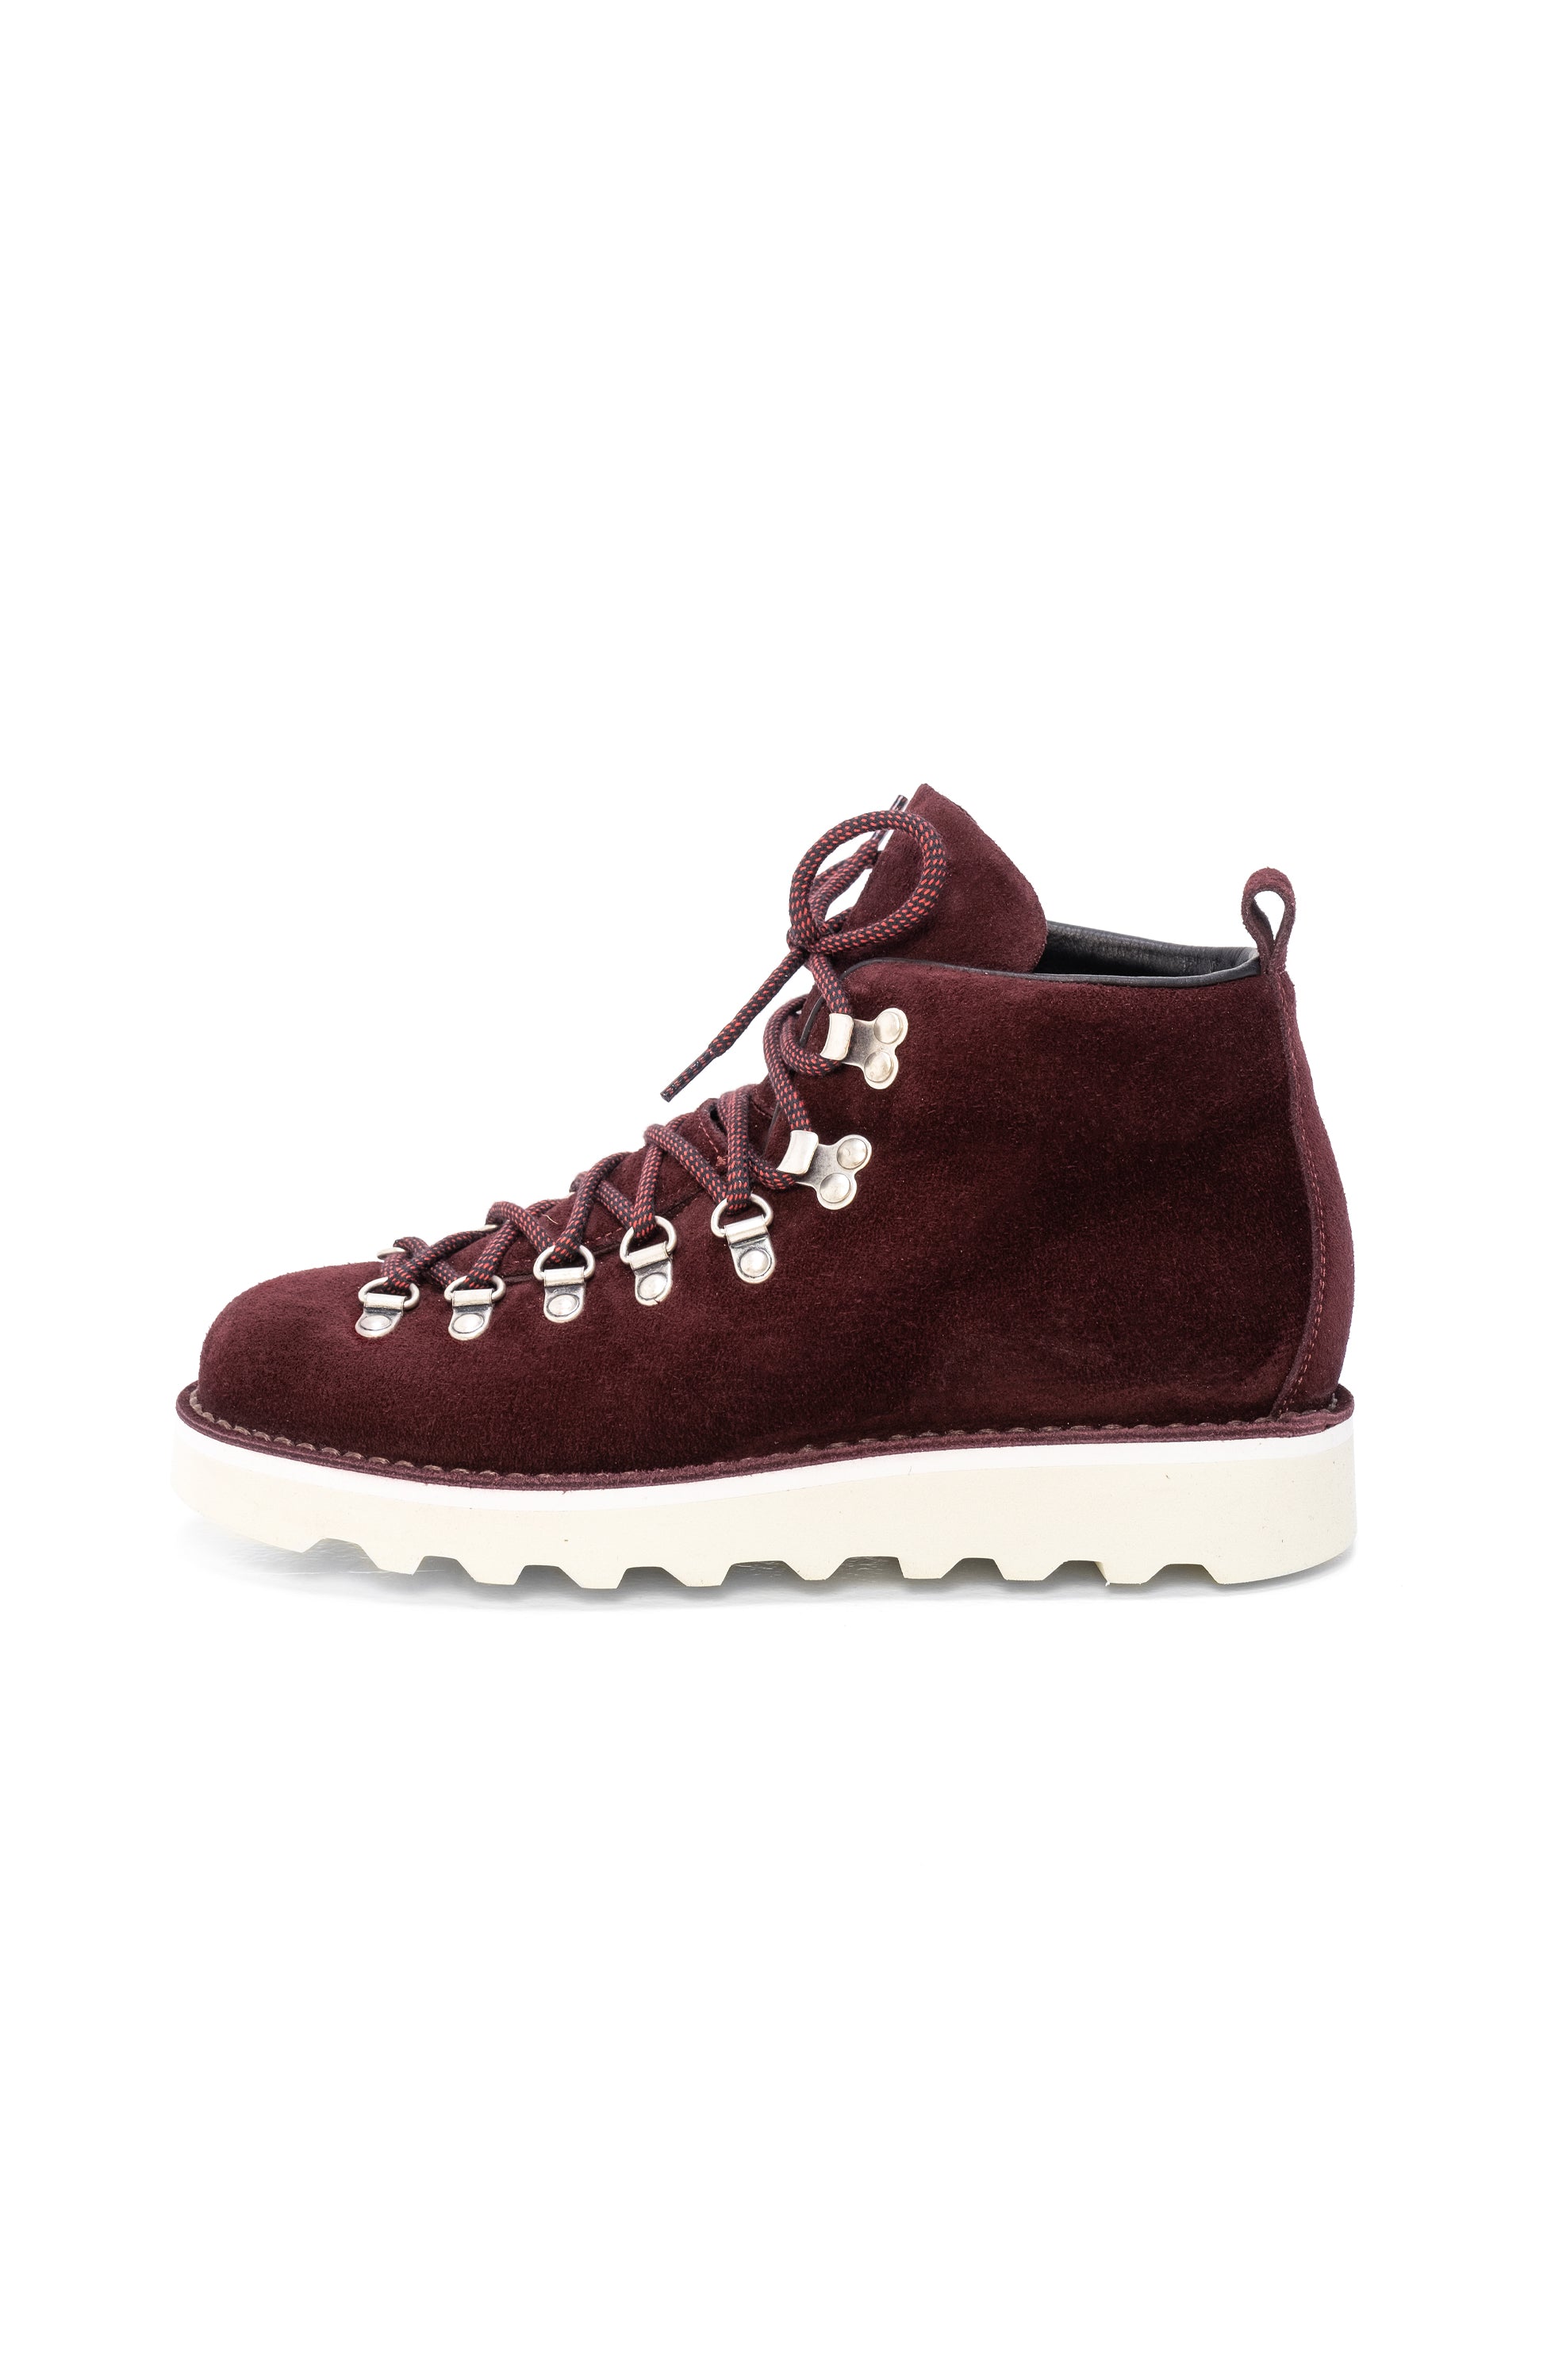 Ripple-sole suede boots ROC